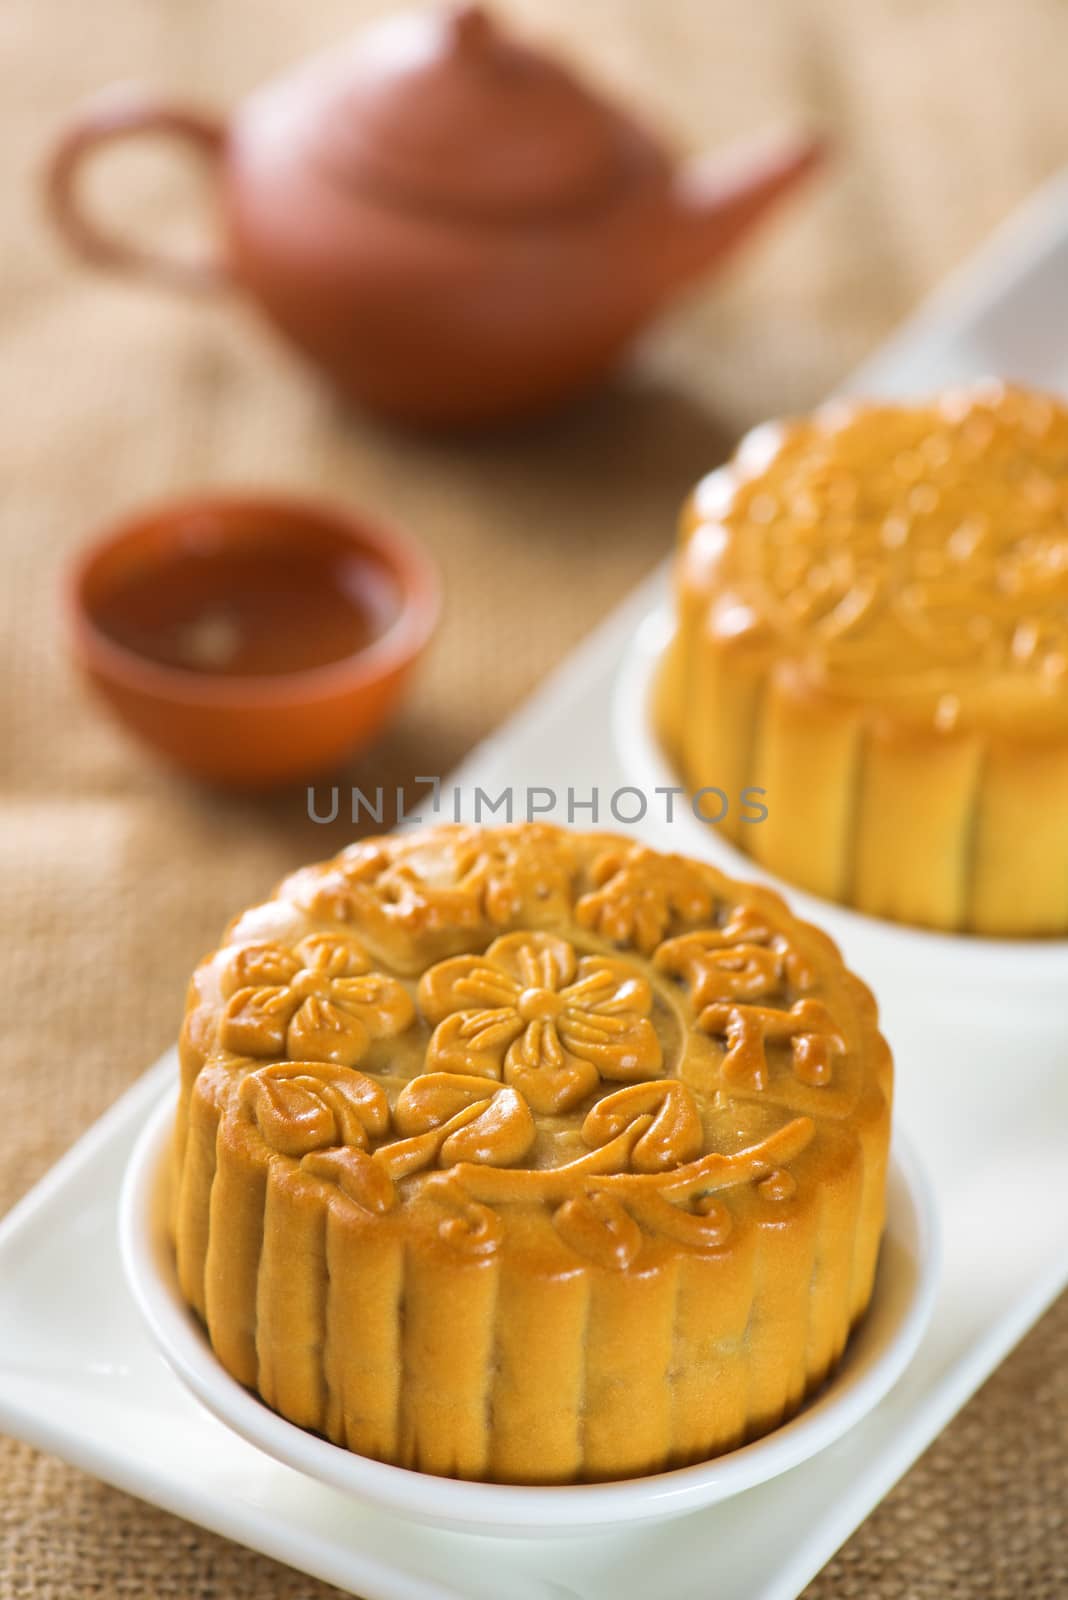 Chinese mid autumn festival foods. Traditional mooncakes on table setting with teapot.  The Chinese words on the mooncakes means assorted fruits nuts, not a logo or trademark.